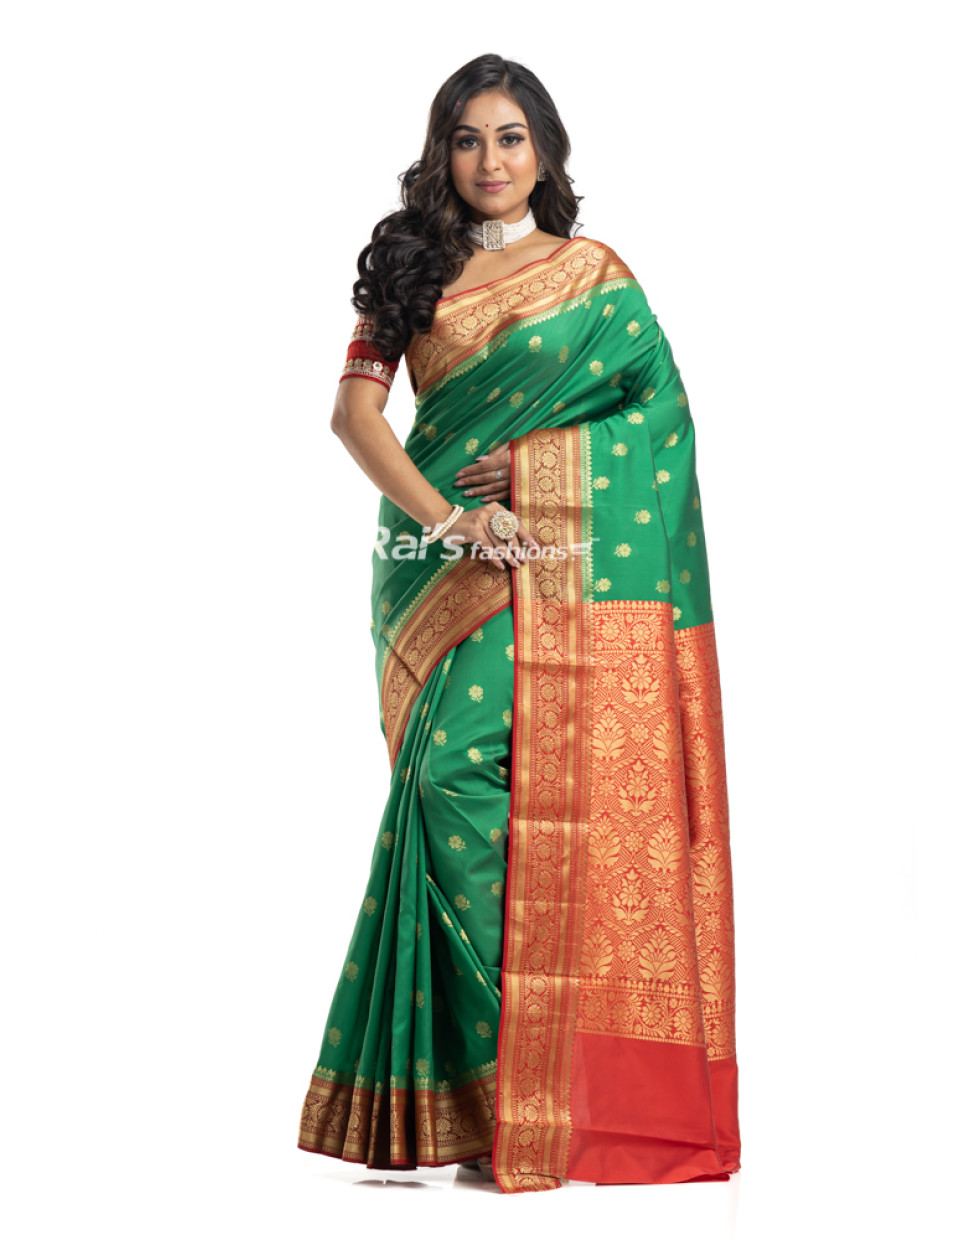 Semi Gadwal Silk Saree With All Over Golden Zari Weaving Butta Work And Contrast Color Traditional Benarasi Worked Border And Pallu (KR2222)